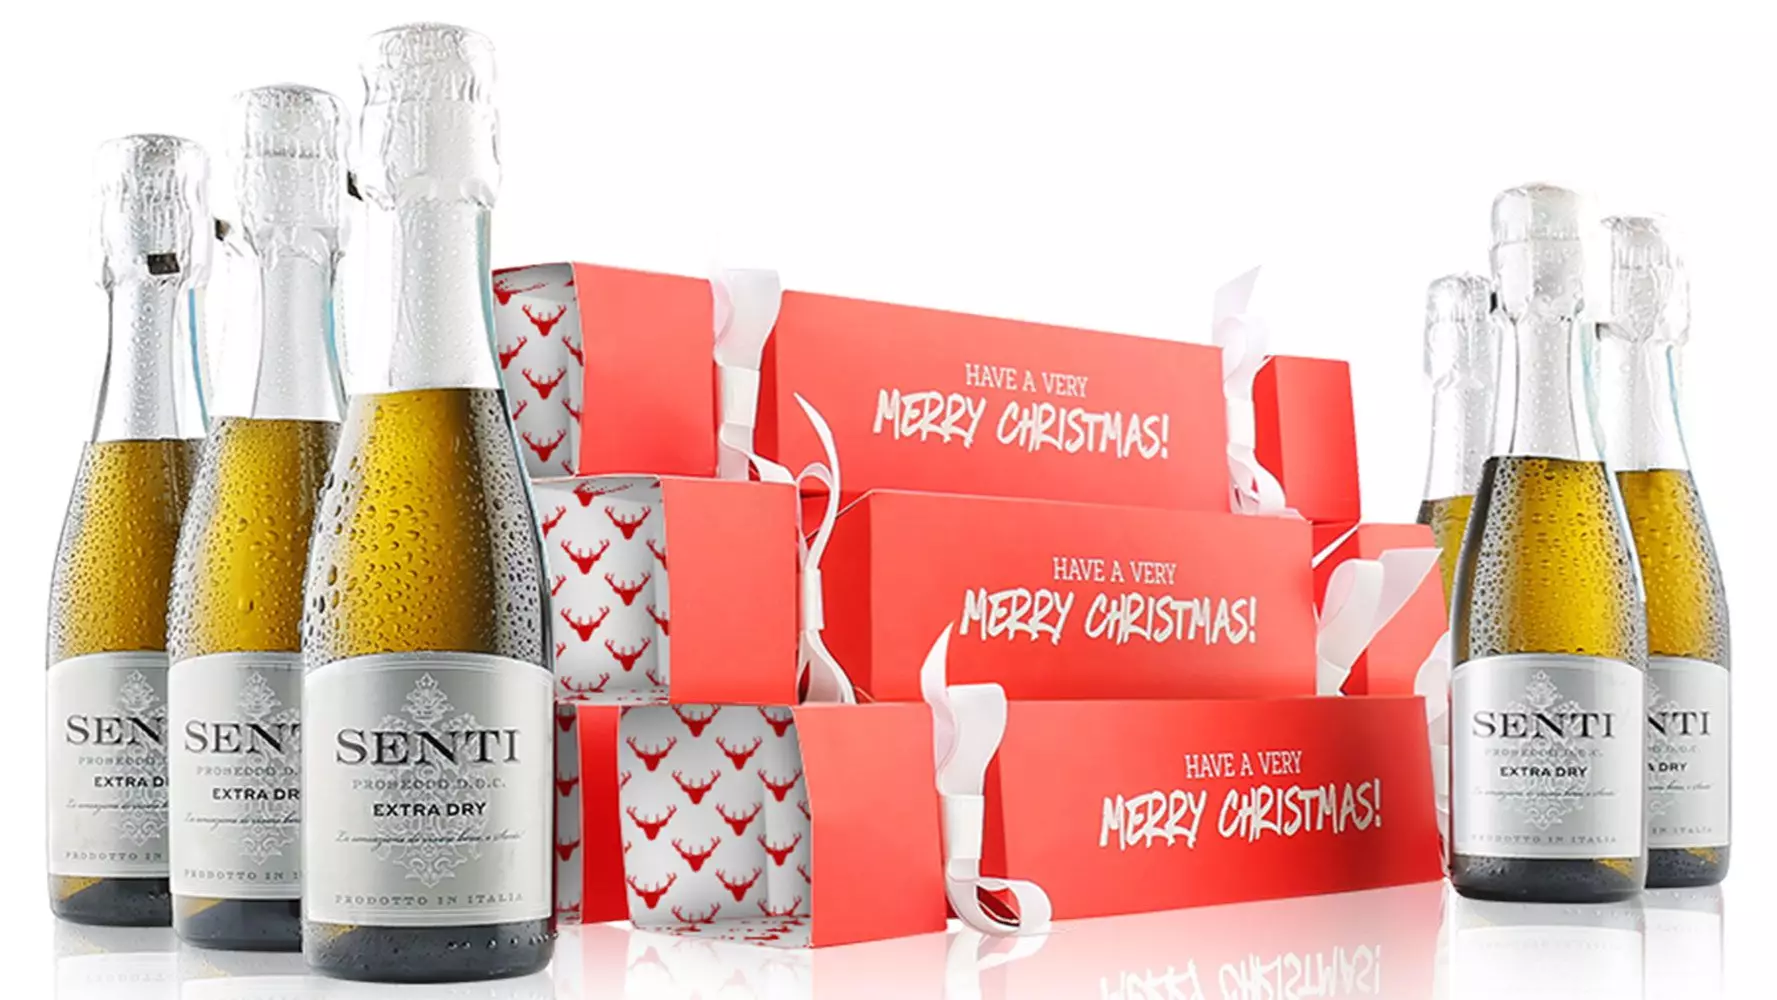 Prosecco Christmas Crackers Are The Festive Fizz We Need This Winter